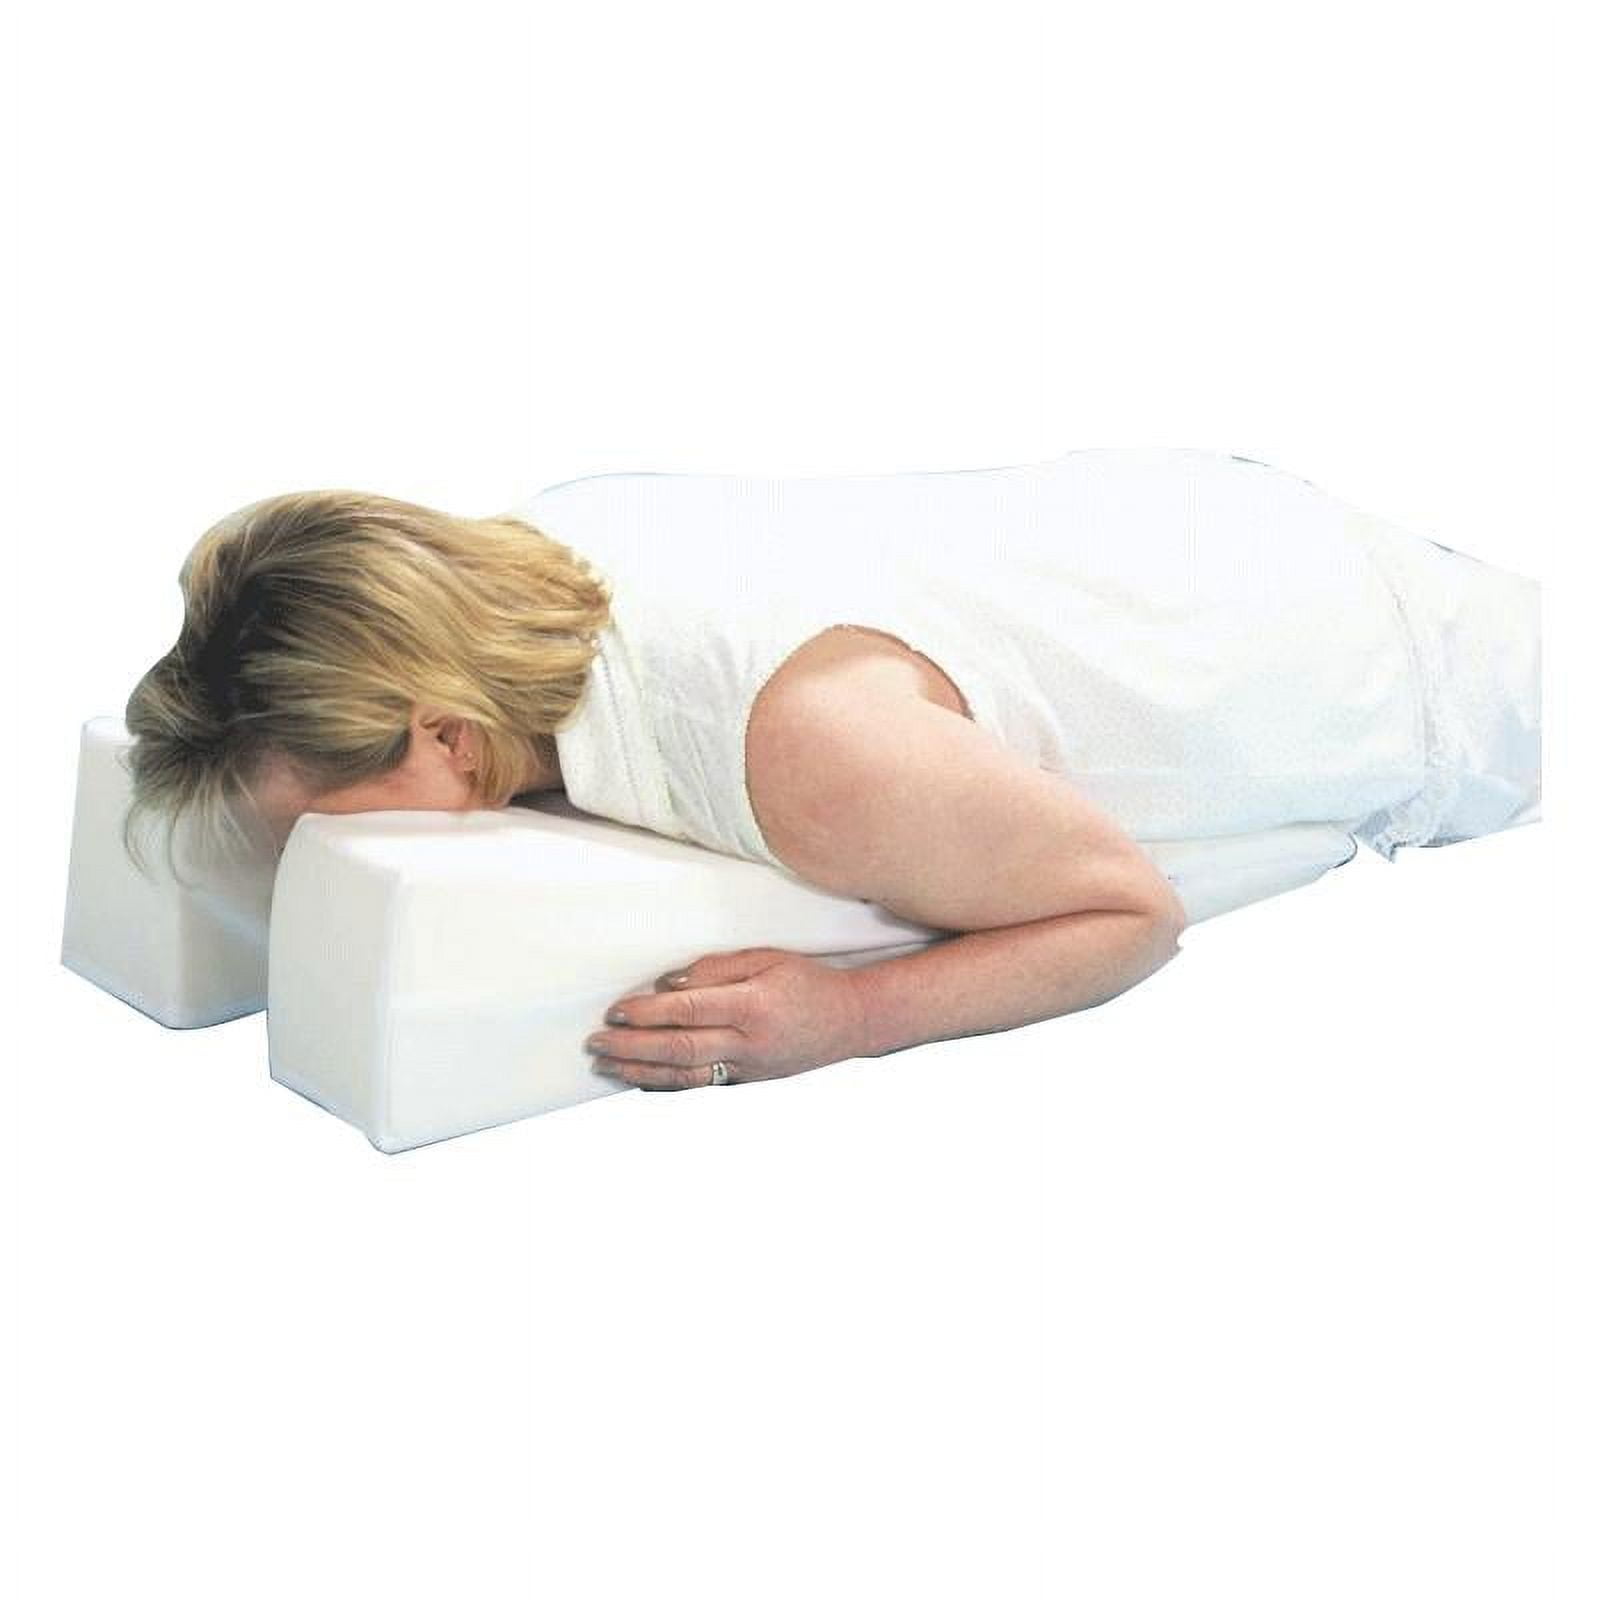 Procare Foam Leg Elevator/Support And Elevation Pillow For Surgery, Injury,  Or Rest 79-90191, 1 count - Kroger